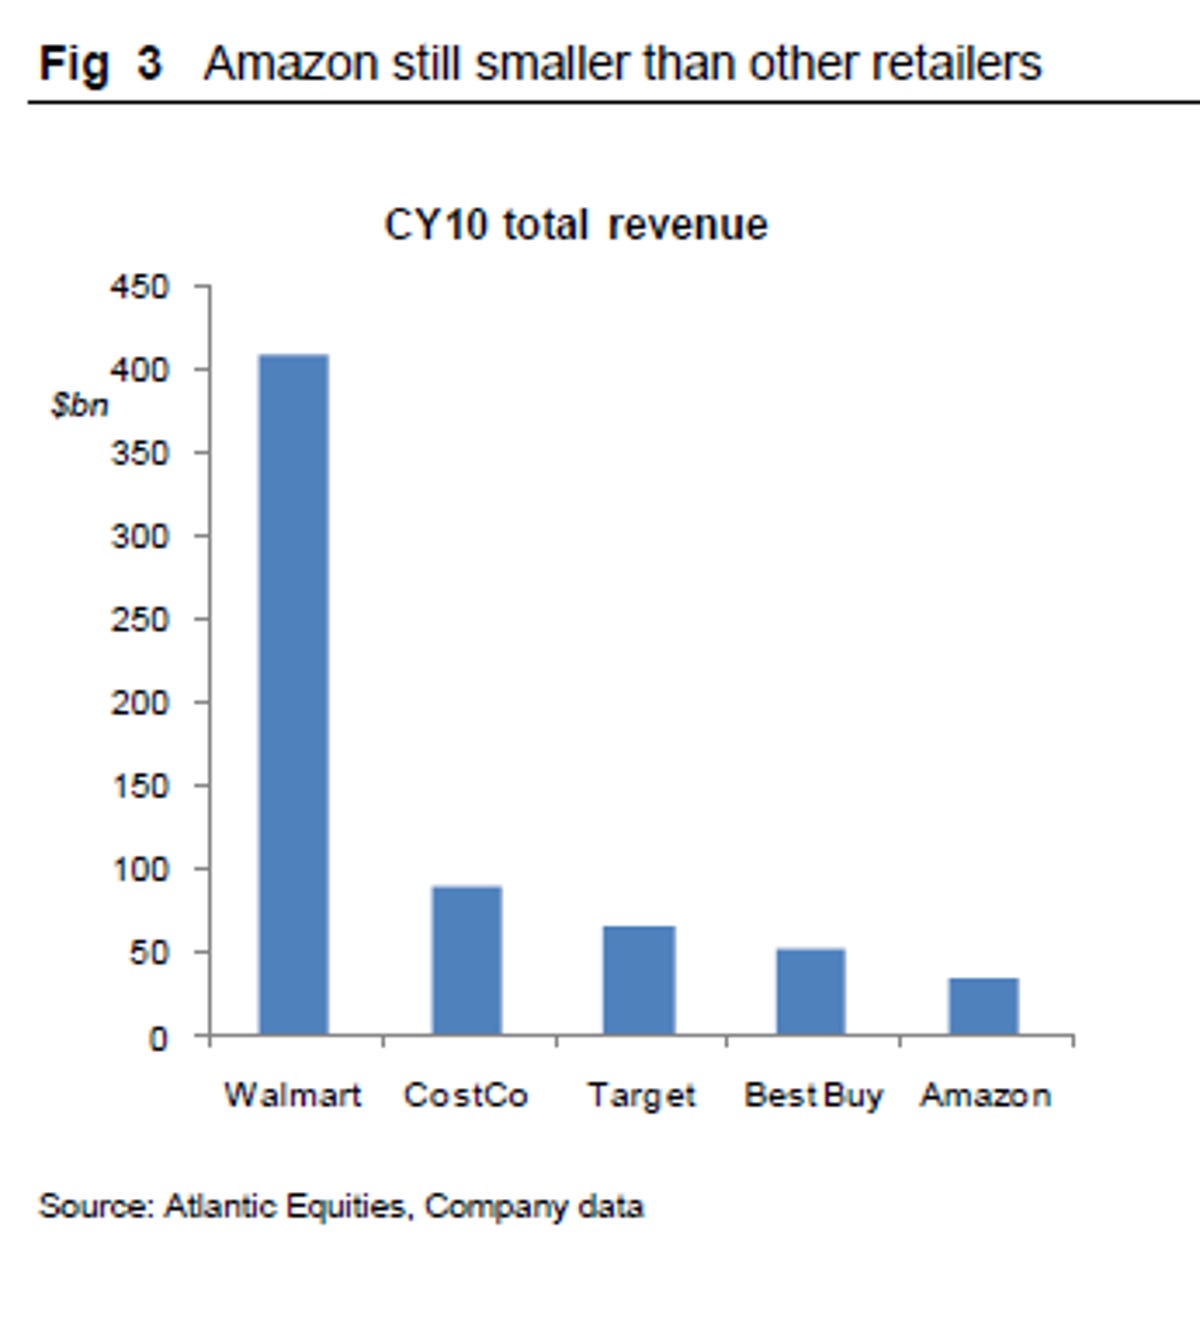 Amazon is still smaller than Wal-mart, Costco, Target, and Best Buy.